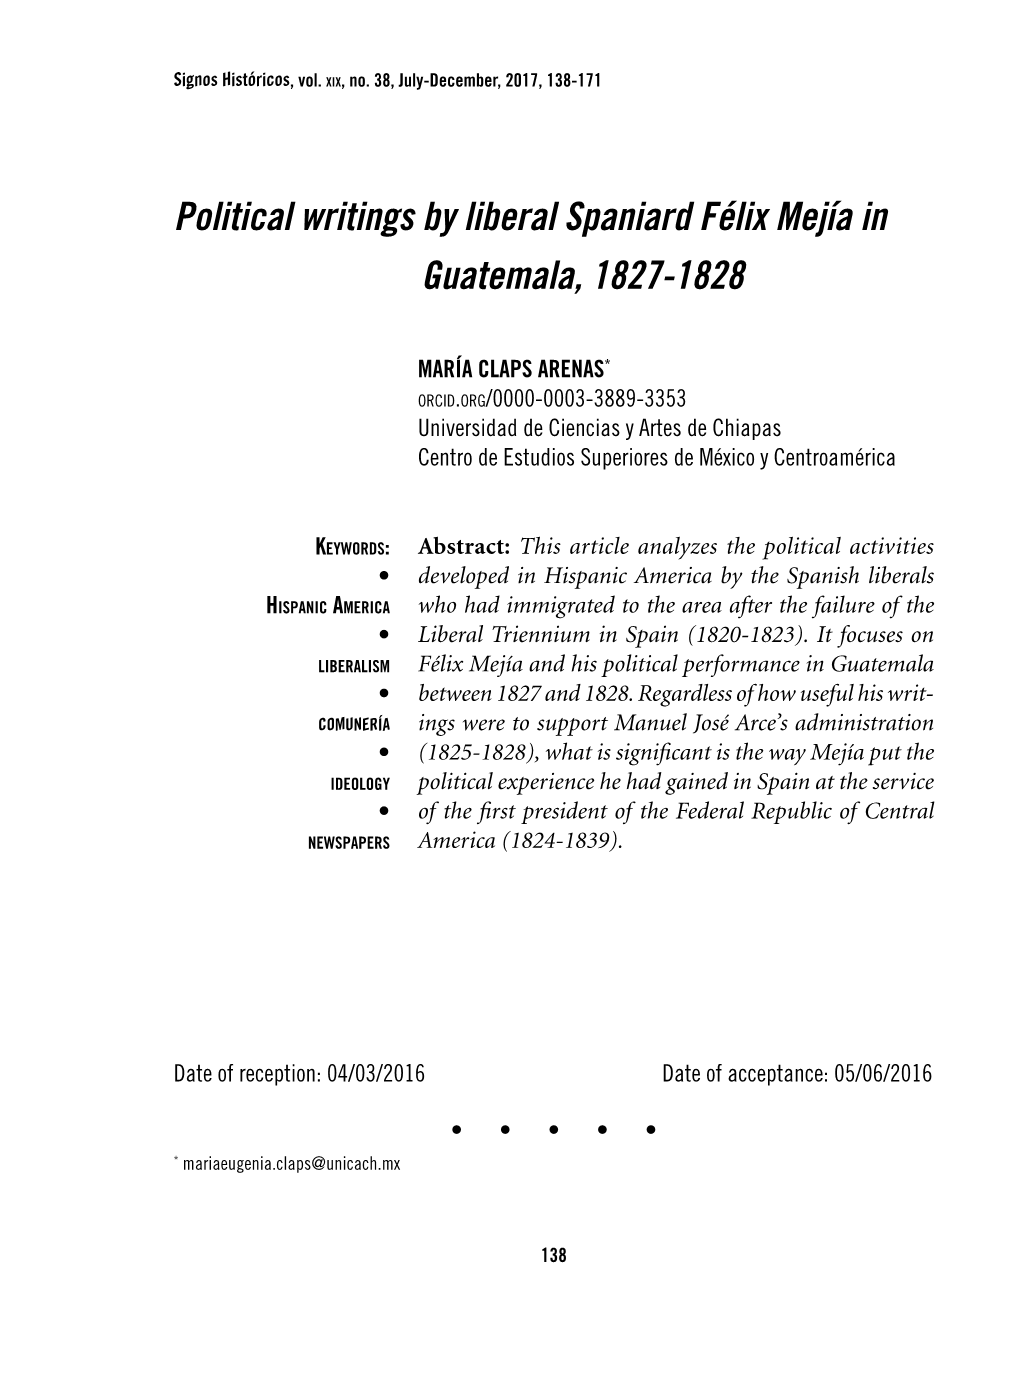 Political Writings by Liberal Spaniard Félix Mejía in Guatemala, 1827-1828